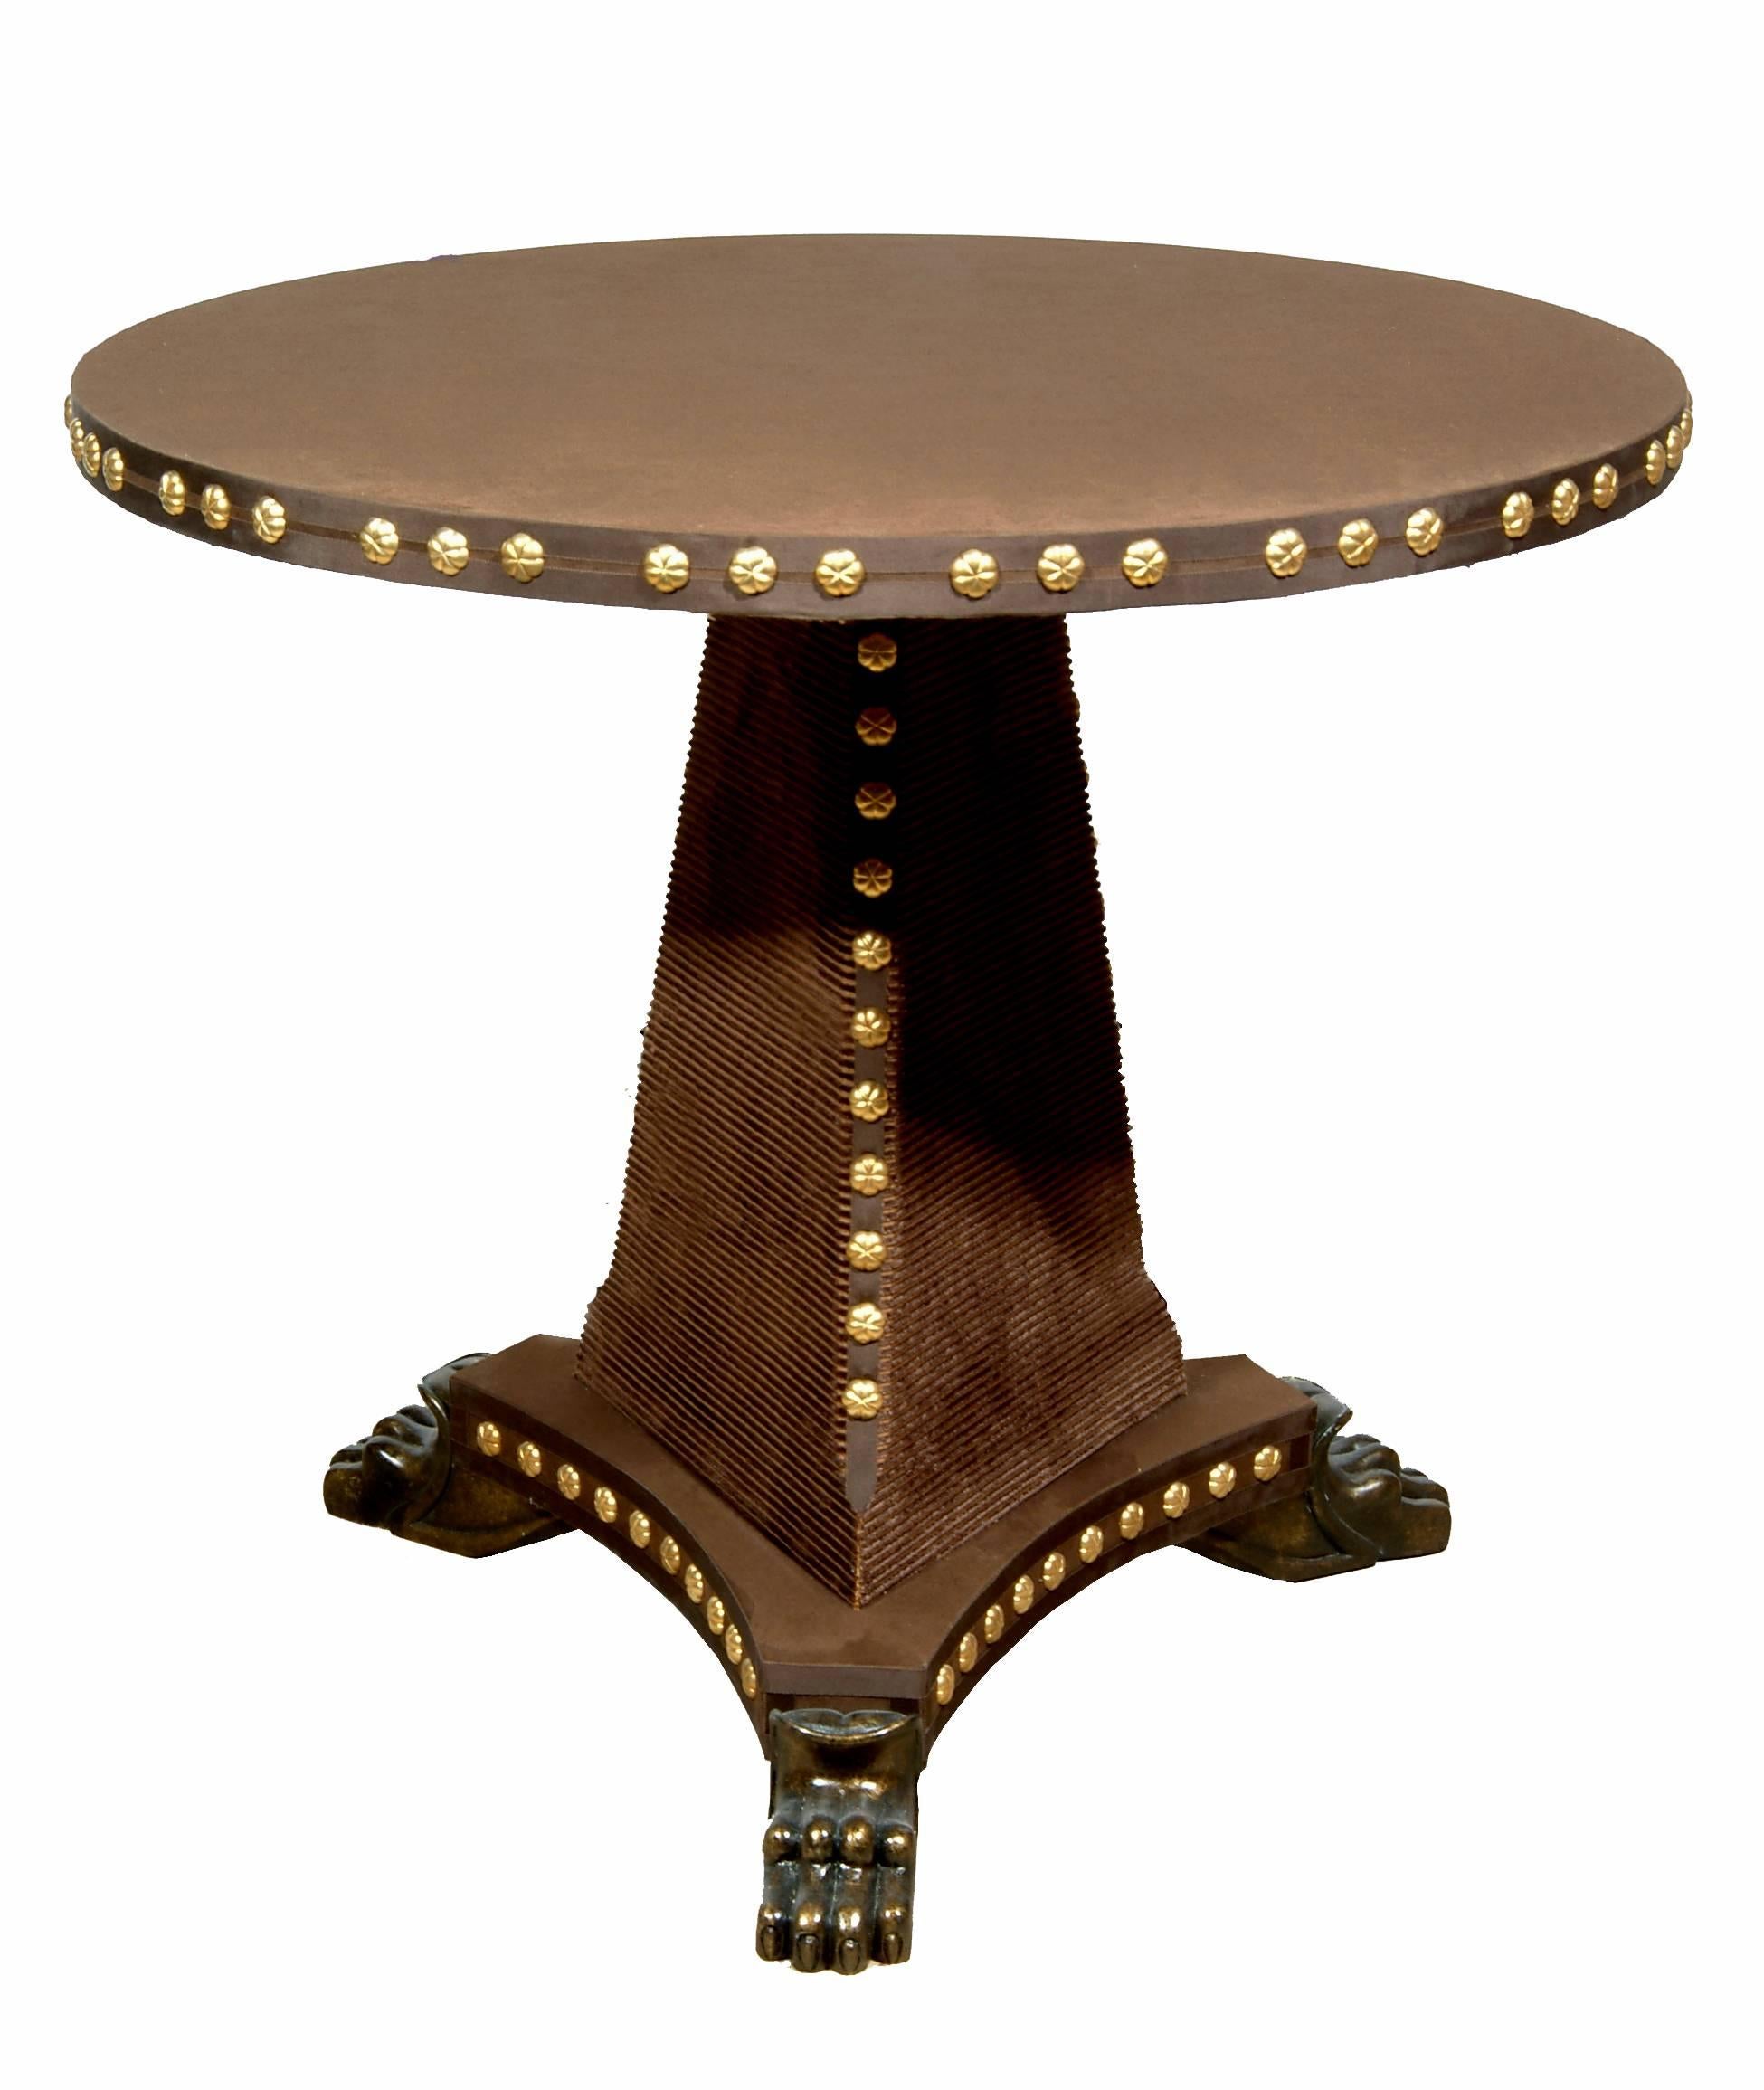 The Tiberius velvet covered centre table with tripod base shown here in studded red velvet and bronzed base, is part of the velvet furniture collection designed by Alidad Ltd and Thomas Messel and based on Baroque and neoclassical shapes. Can be